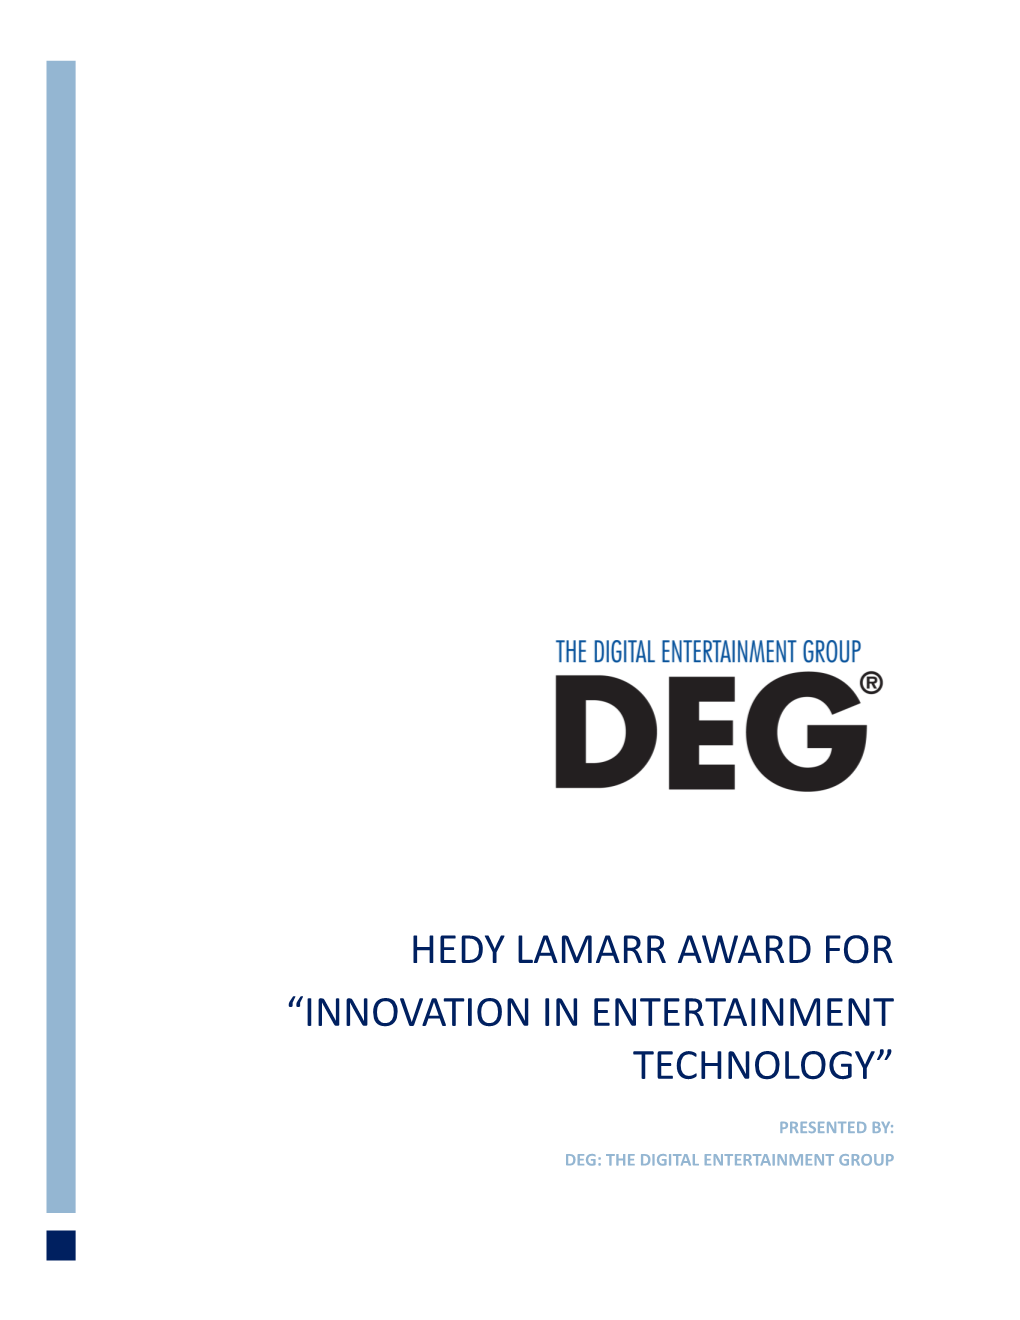 Hedy Lamarr Award for “Innovation in Entertainment Technology”